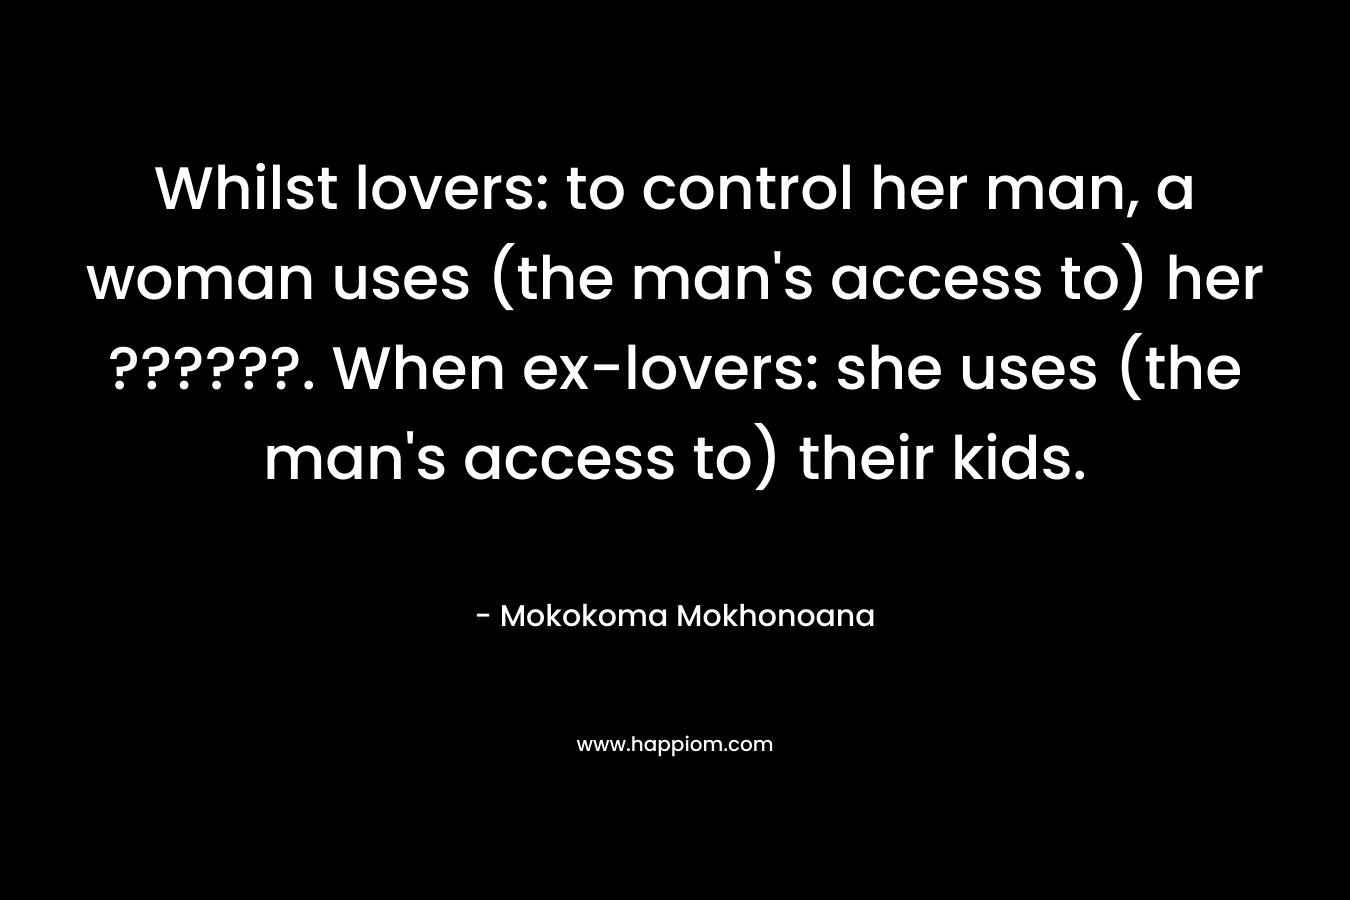 Whilst lovers: to control her man, a woman uses (the man's access to) her ??????. When ex-lovers: she uses (the man's access to) their kids.